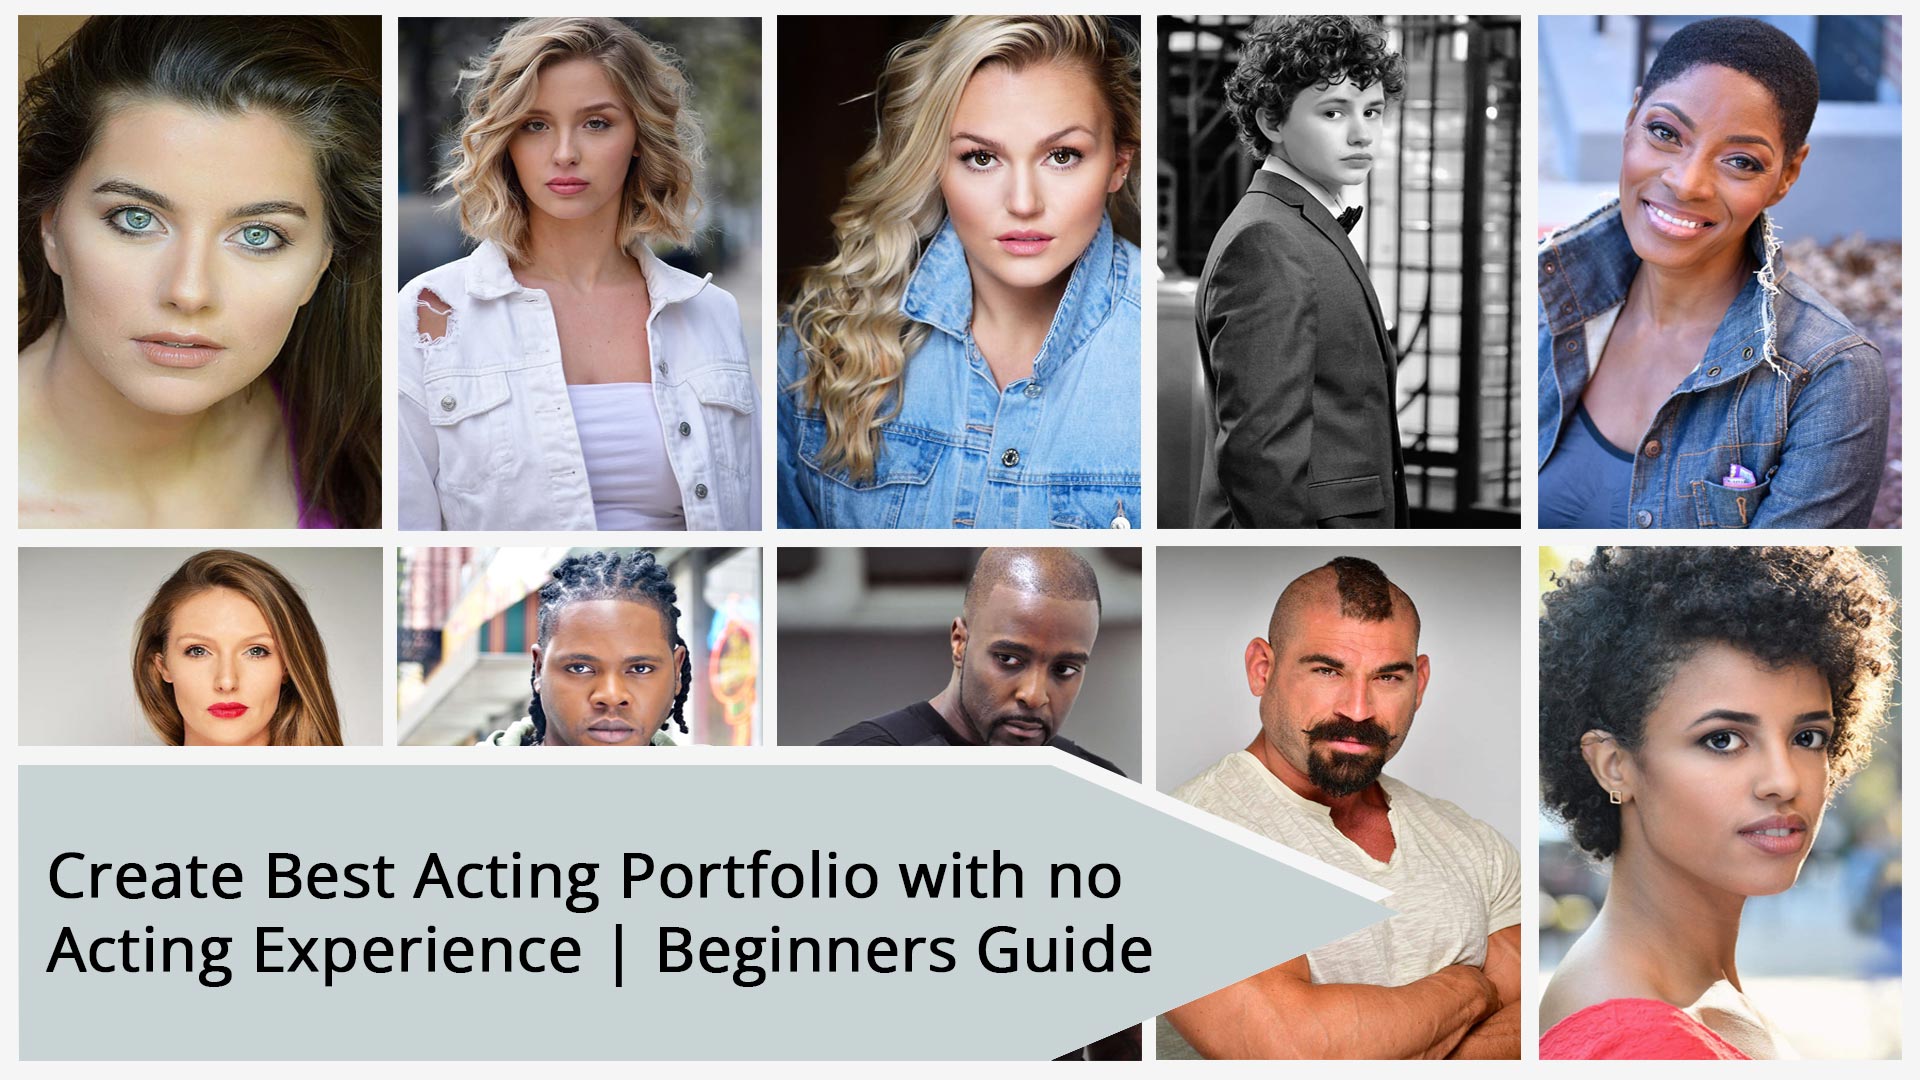 Create Best Acting Portfolio with no Acting Experience | Beginners Guide